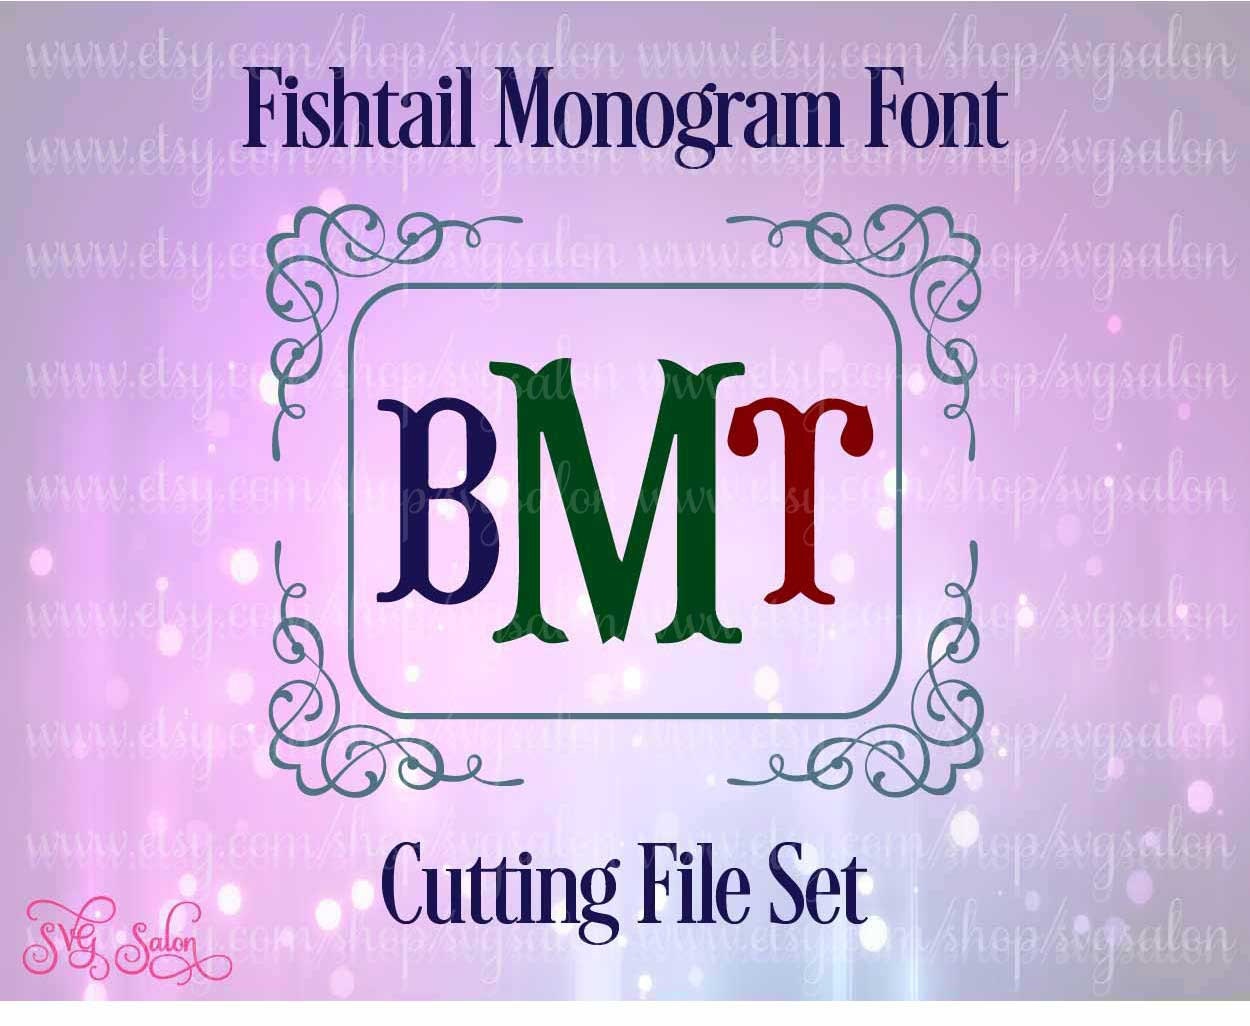 Download Fishtail Monogram Font Cutting File Set in Svg Eps by SVGSalon